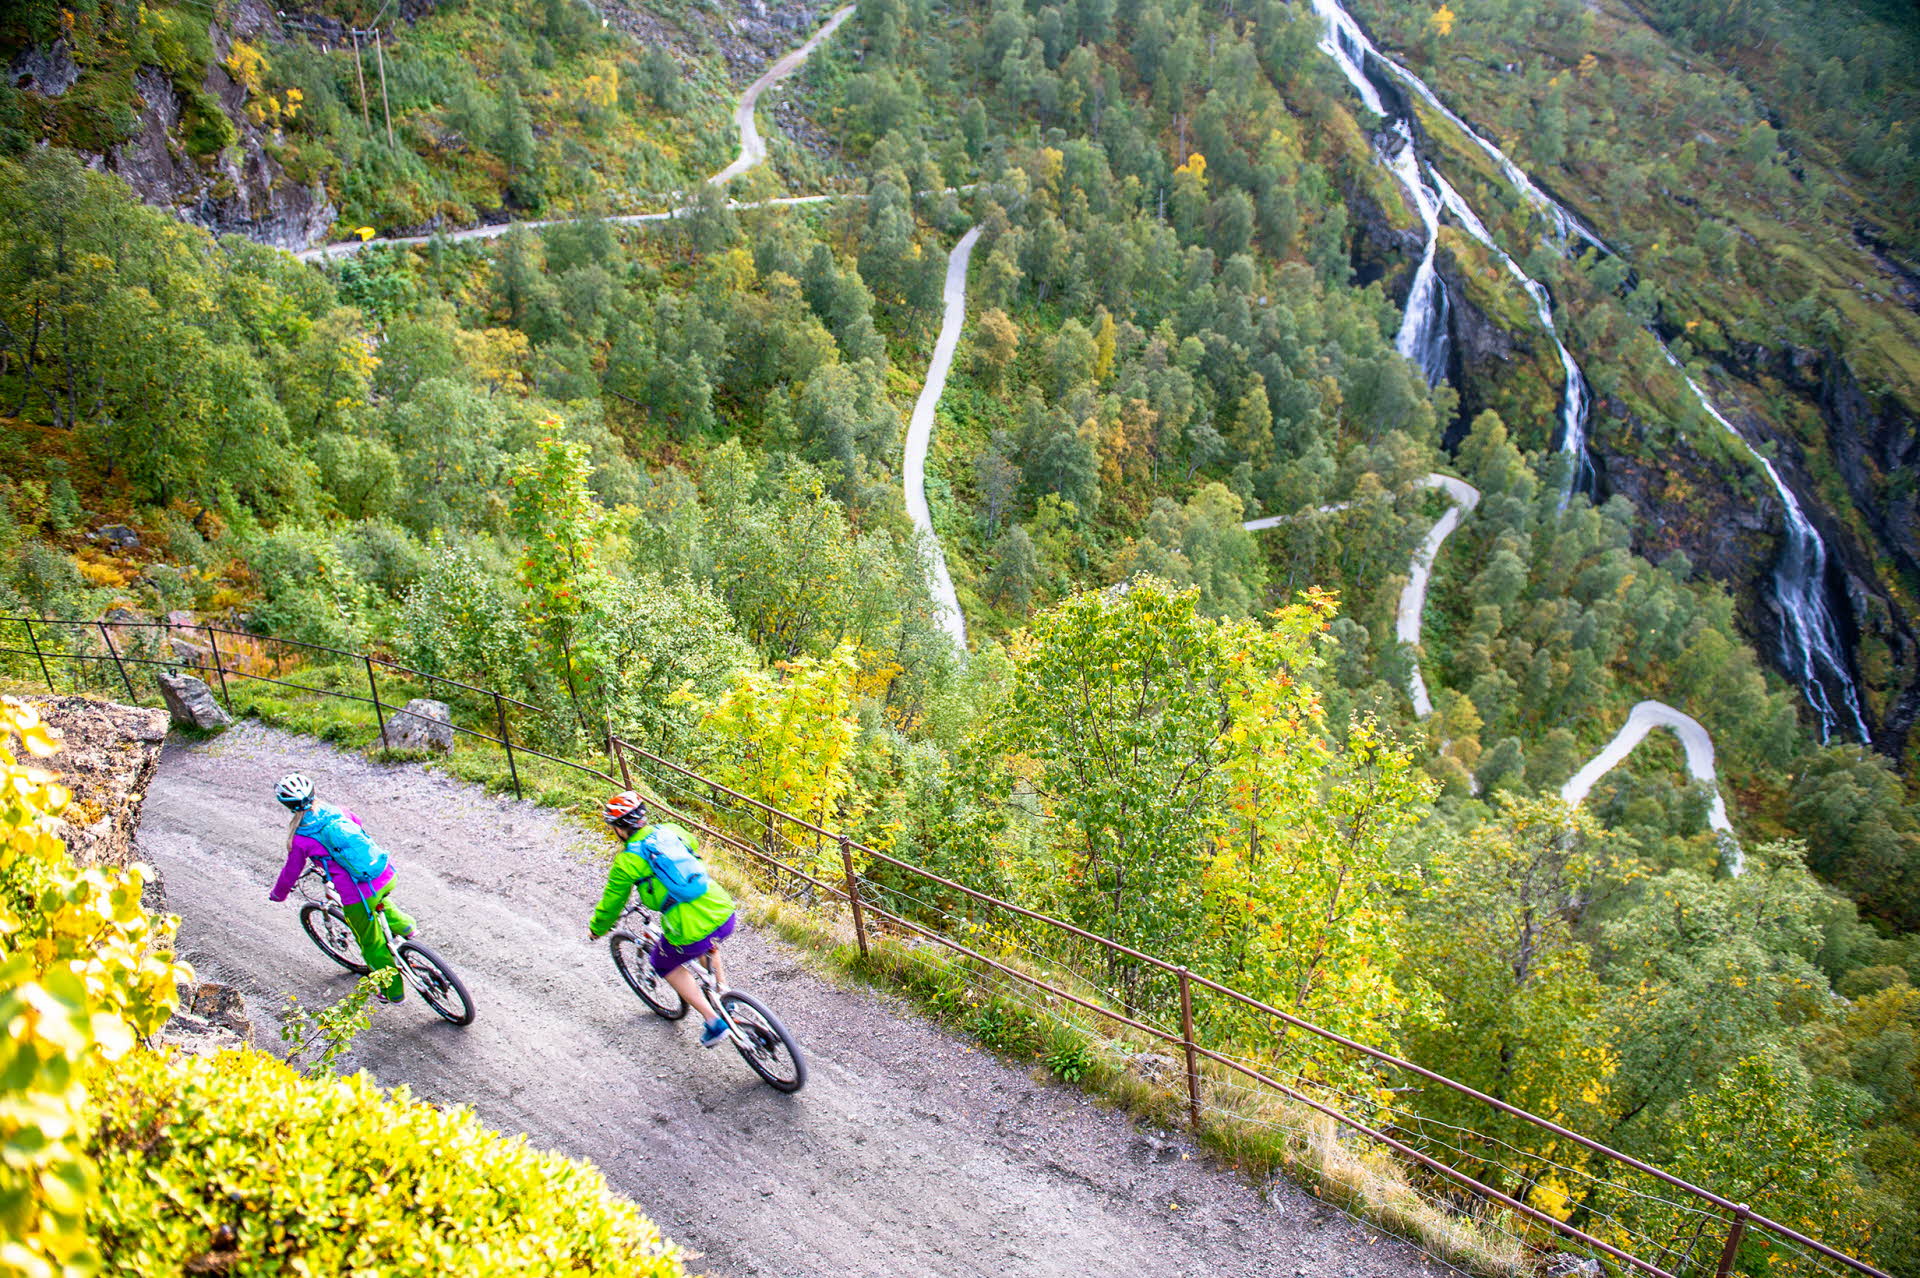 Two cyclists on their way down from Vatnahalsen towards Flåm